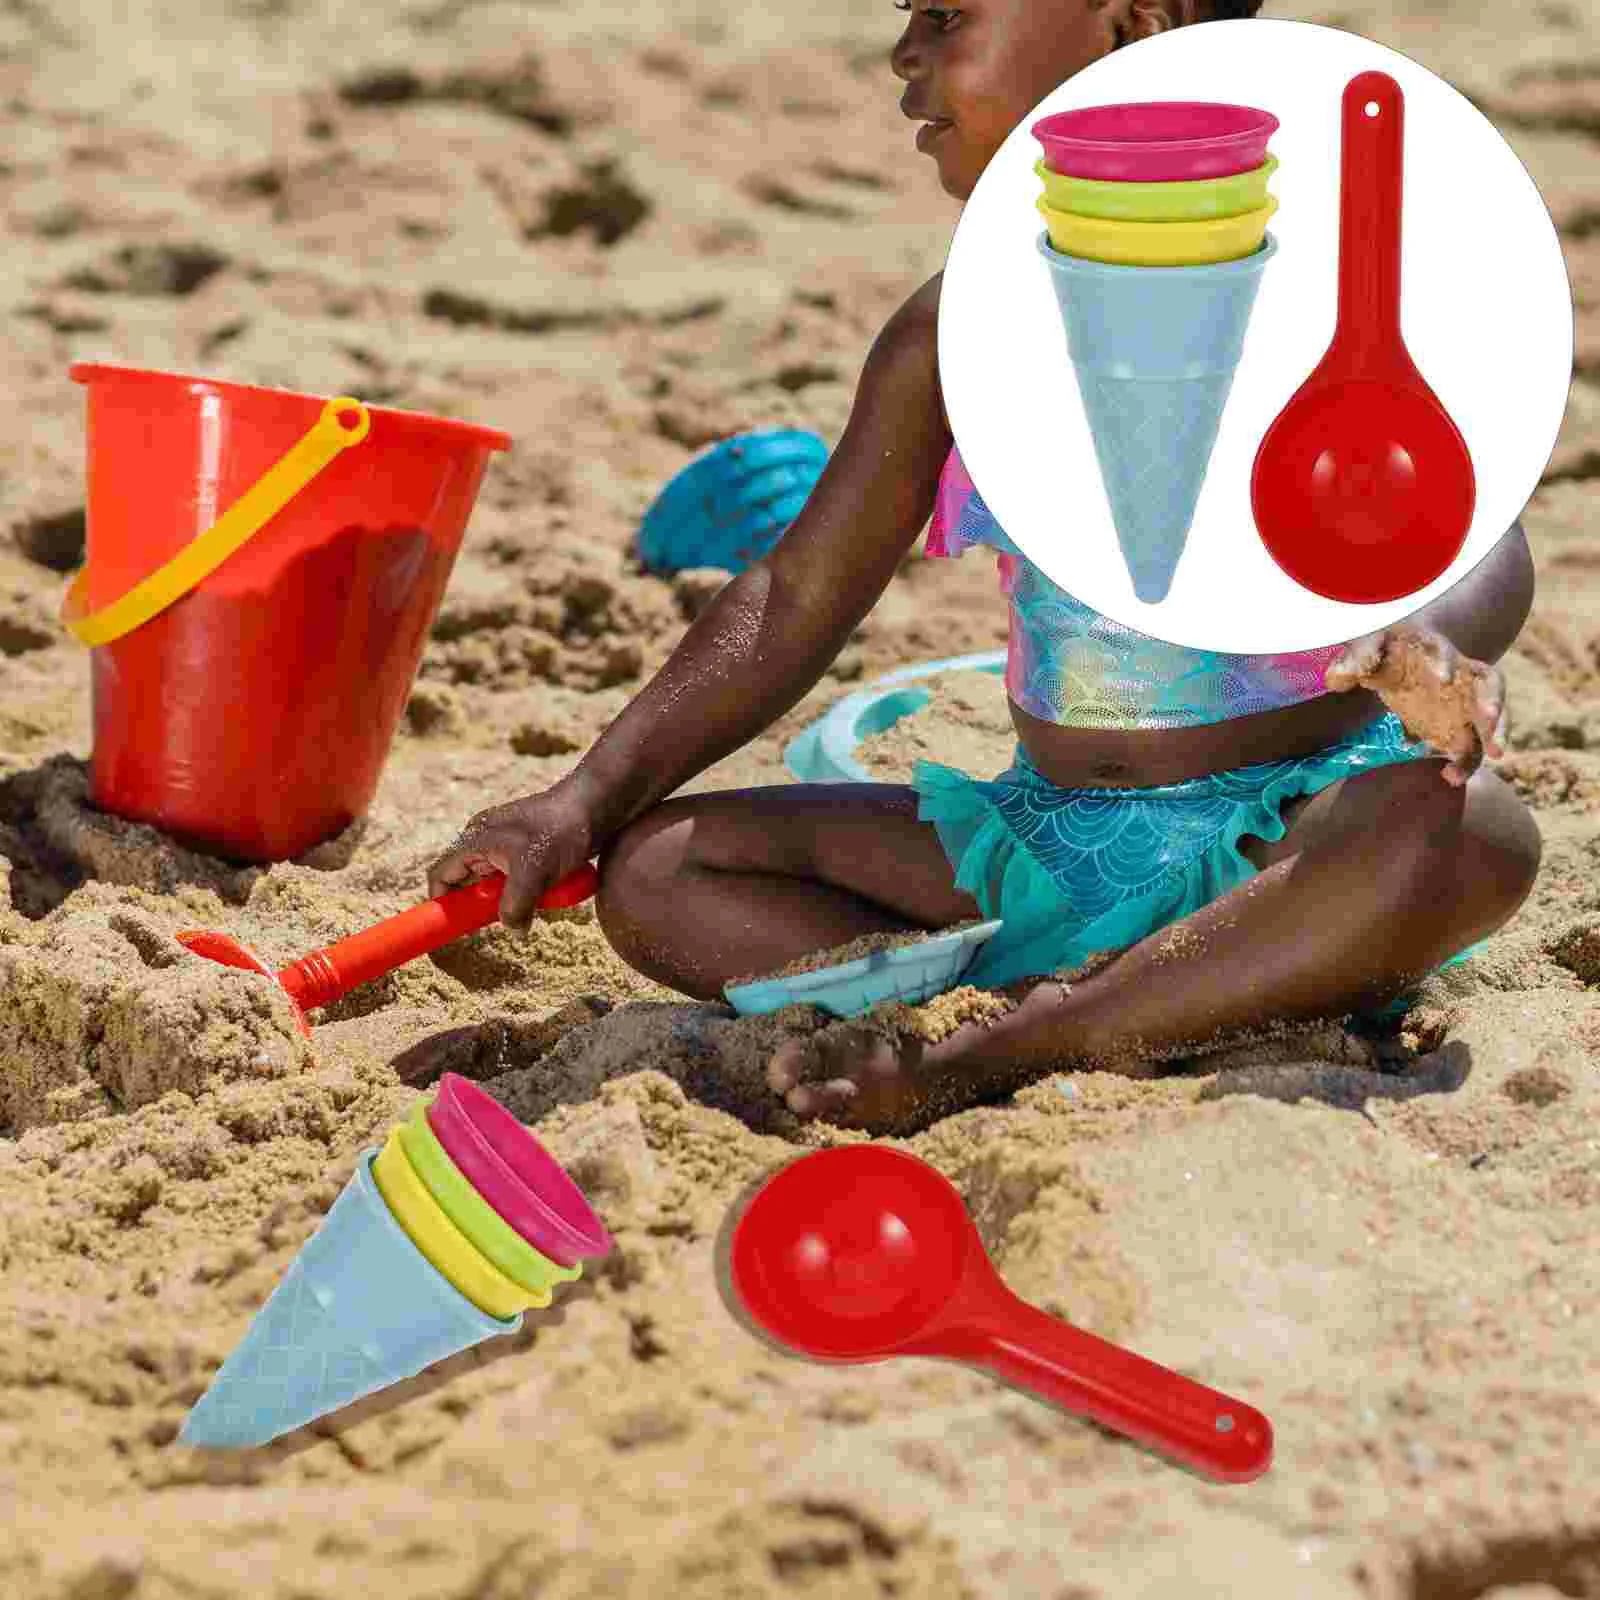 

Sand Ice Cream Toys Beach Toy Kids Play Scoop Cone Mold Set Plastic Cones Molds Pretend Sandbox Playset Summer Cup Castle